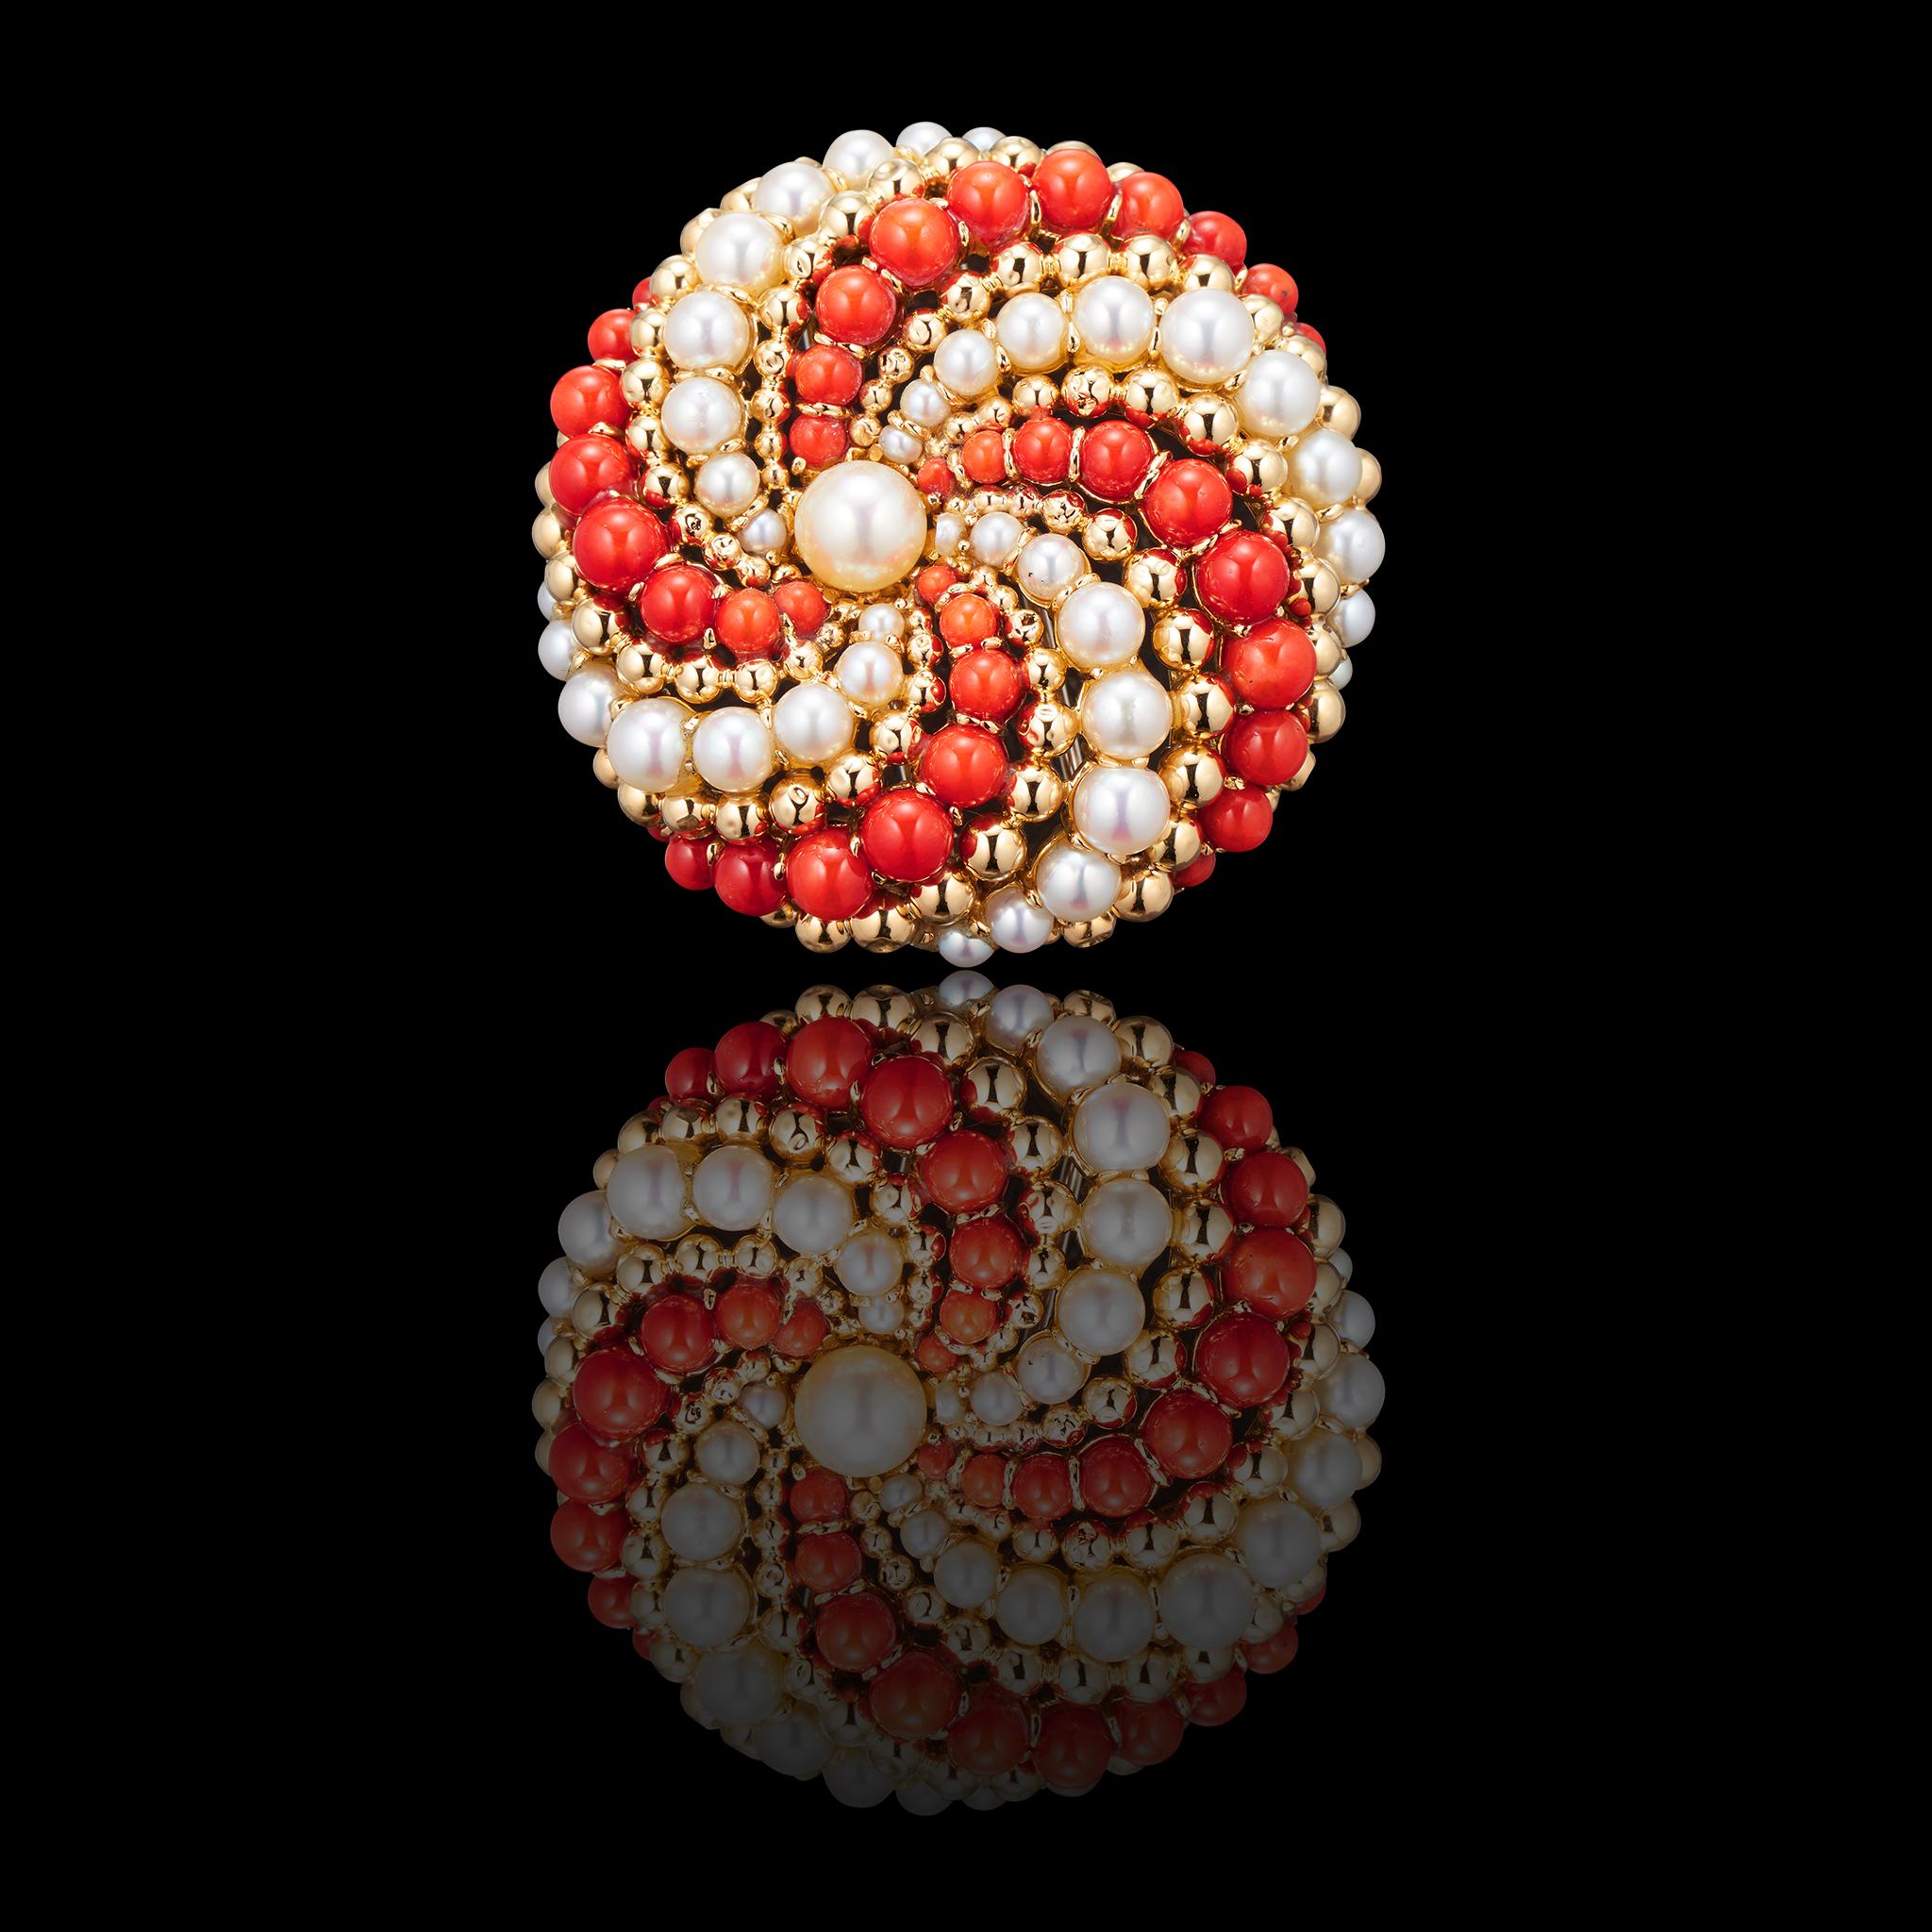 Van Cleef & Arpels -very rare 1960s Brooch-Pendant in 18k yellow gold  with pearls and Mediterranean red coral .This Van Cleef & Arpels 1960s Brooch-Pendant is part of the  Van Cleef & Arpels abstract theme.
-Pearls.
-Red Coral